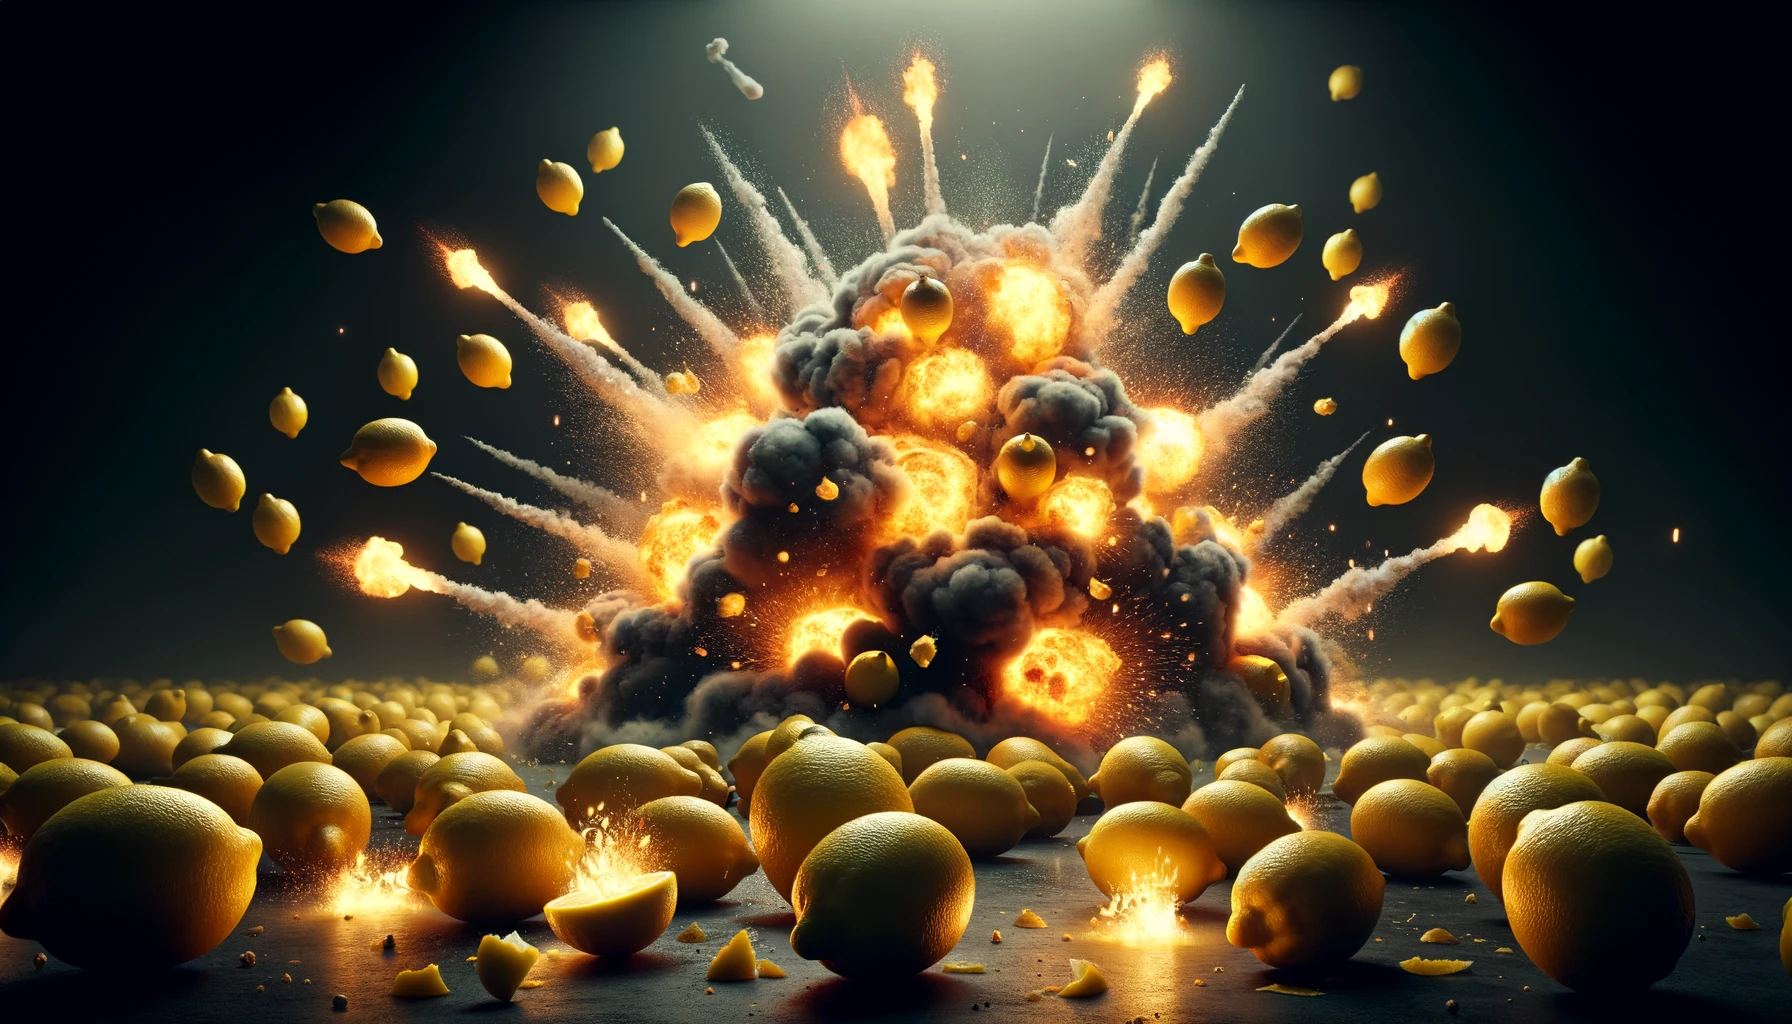 Visualize a cinematic widescreen image of combustible lemons that are exploding. This concept takes a humorous and slightly surreal approach to the idea of lemons with the ability to combust. In this scene, the lemons are seen in the moment of explosion, with bright flames and sparks erupting from them against a dark, mysterious backdrop that enhances the dramatic effect of the explosions. The contrast between the dark setting and the bright, fiery explosions of the lemons creates a visually striking image. The lemons are scattered across the scene, some in mid-air as they explode, adding dynamic movement and intensity to the composition. This scene captures the unexpected and whimsical notion of combustible lemons in a visually compelling way.